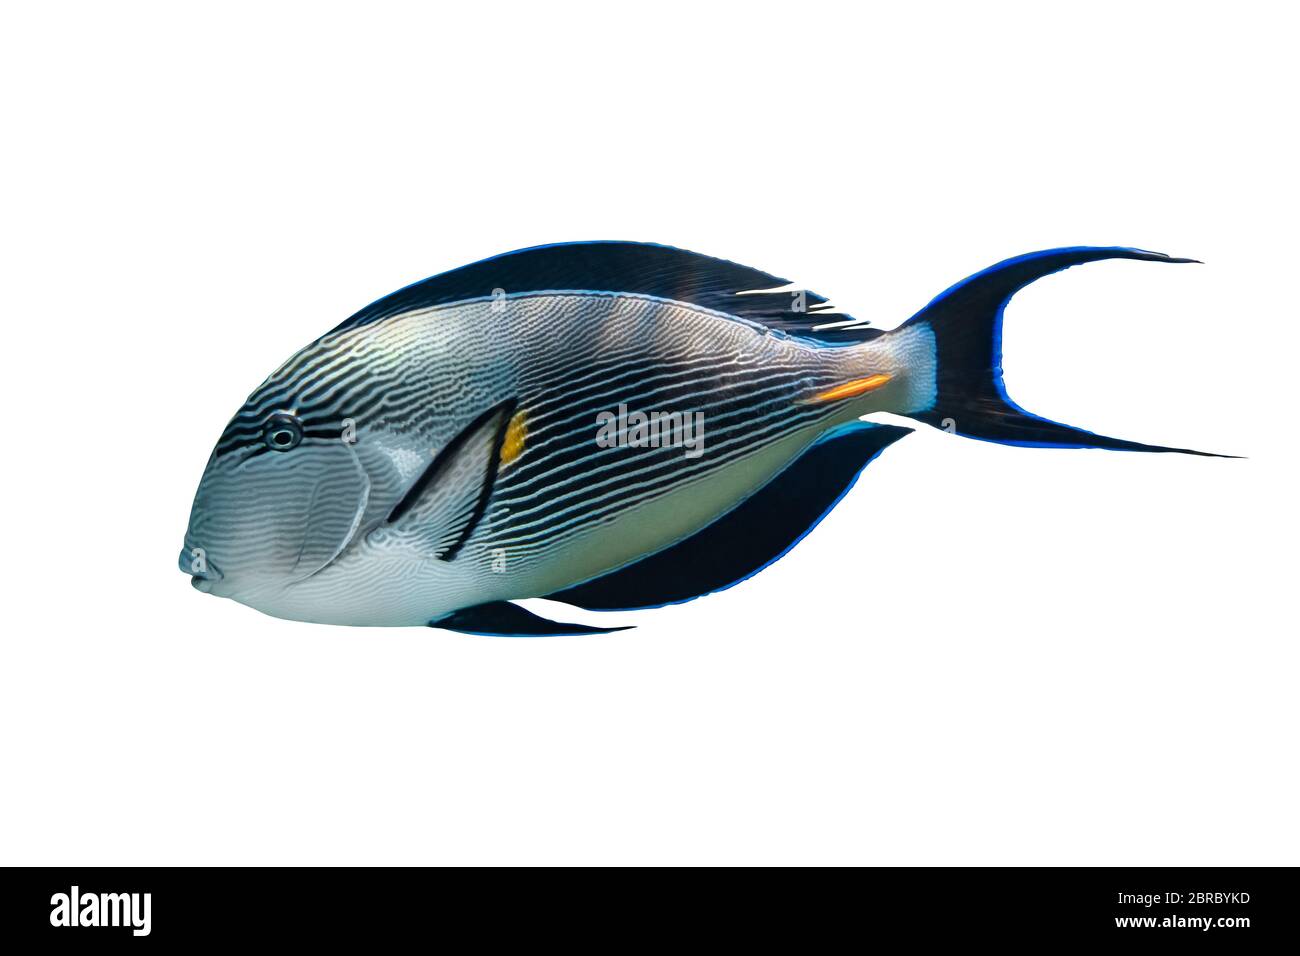 Sohal Surgeonfish (Arabian Acanthurus Sohal) Isolated On White Background. Tropical Fish With Black Fins, Yellow And Blue Stripes, Side View, Close Up Stock Photo